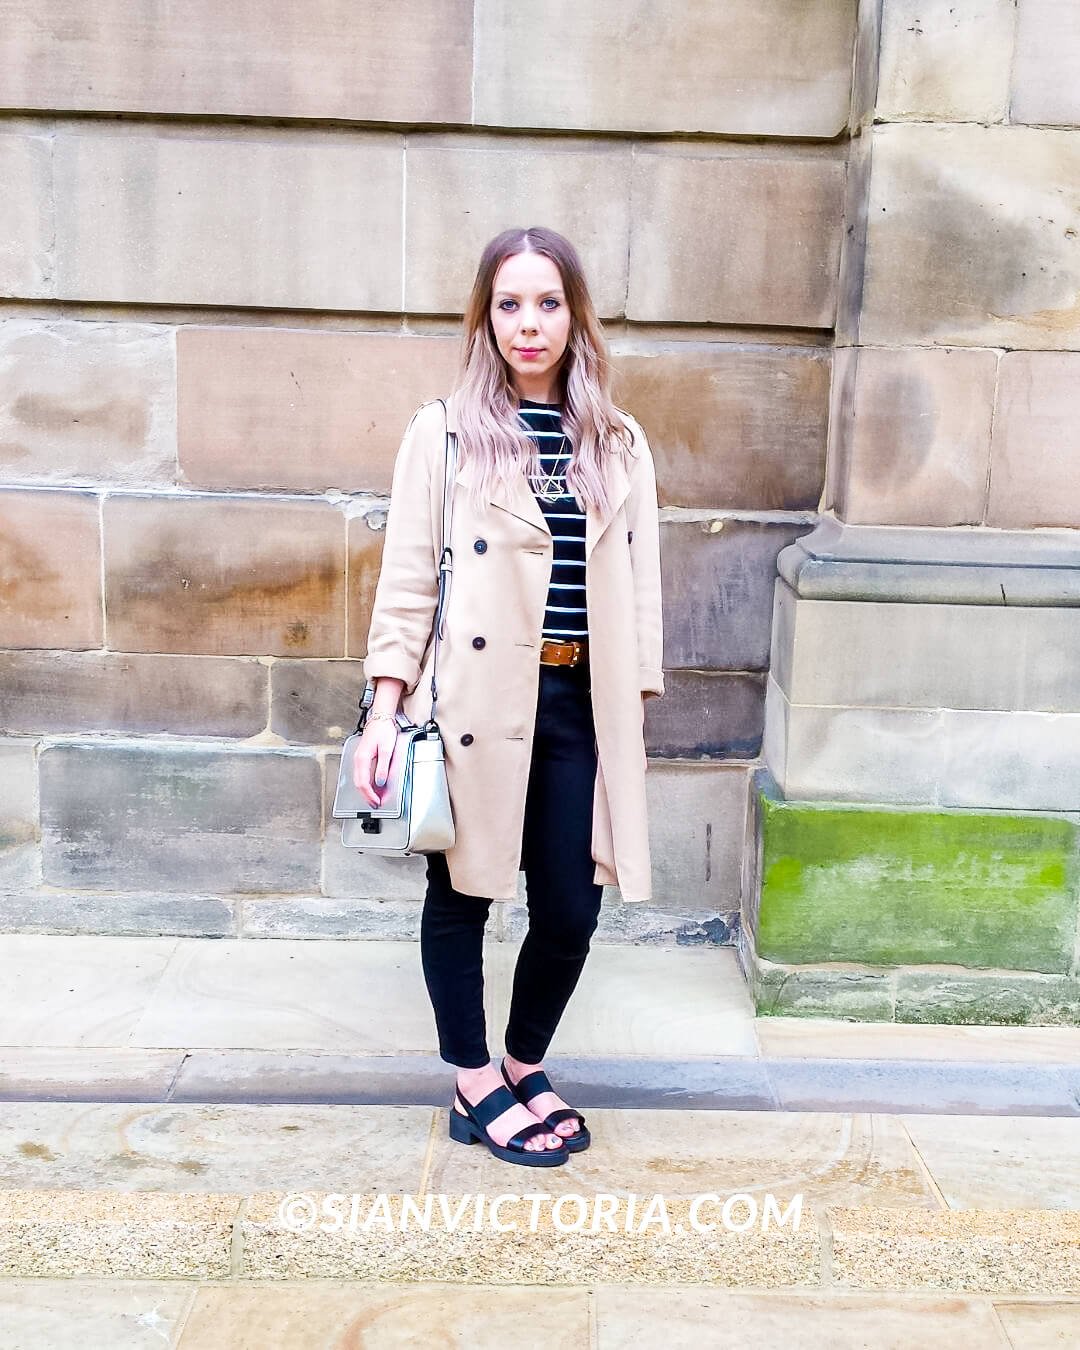 OOTD - Trench Coat, Monochrome Stripes & Sandals — Sian Victoria.